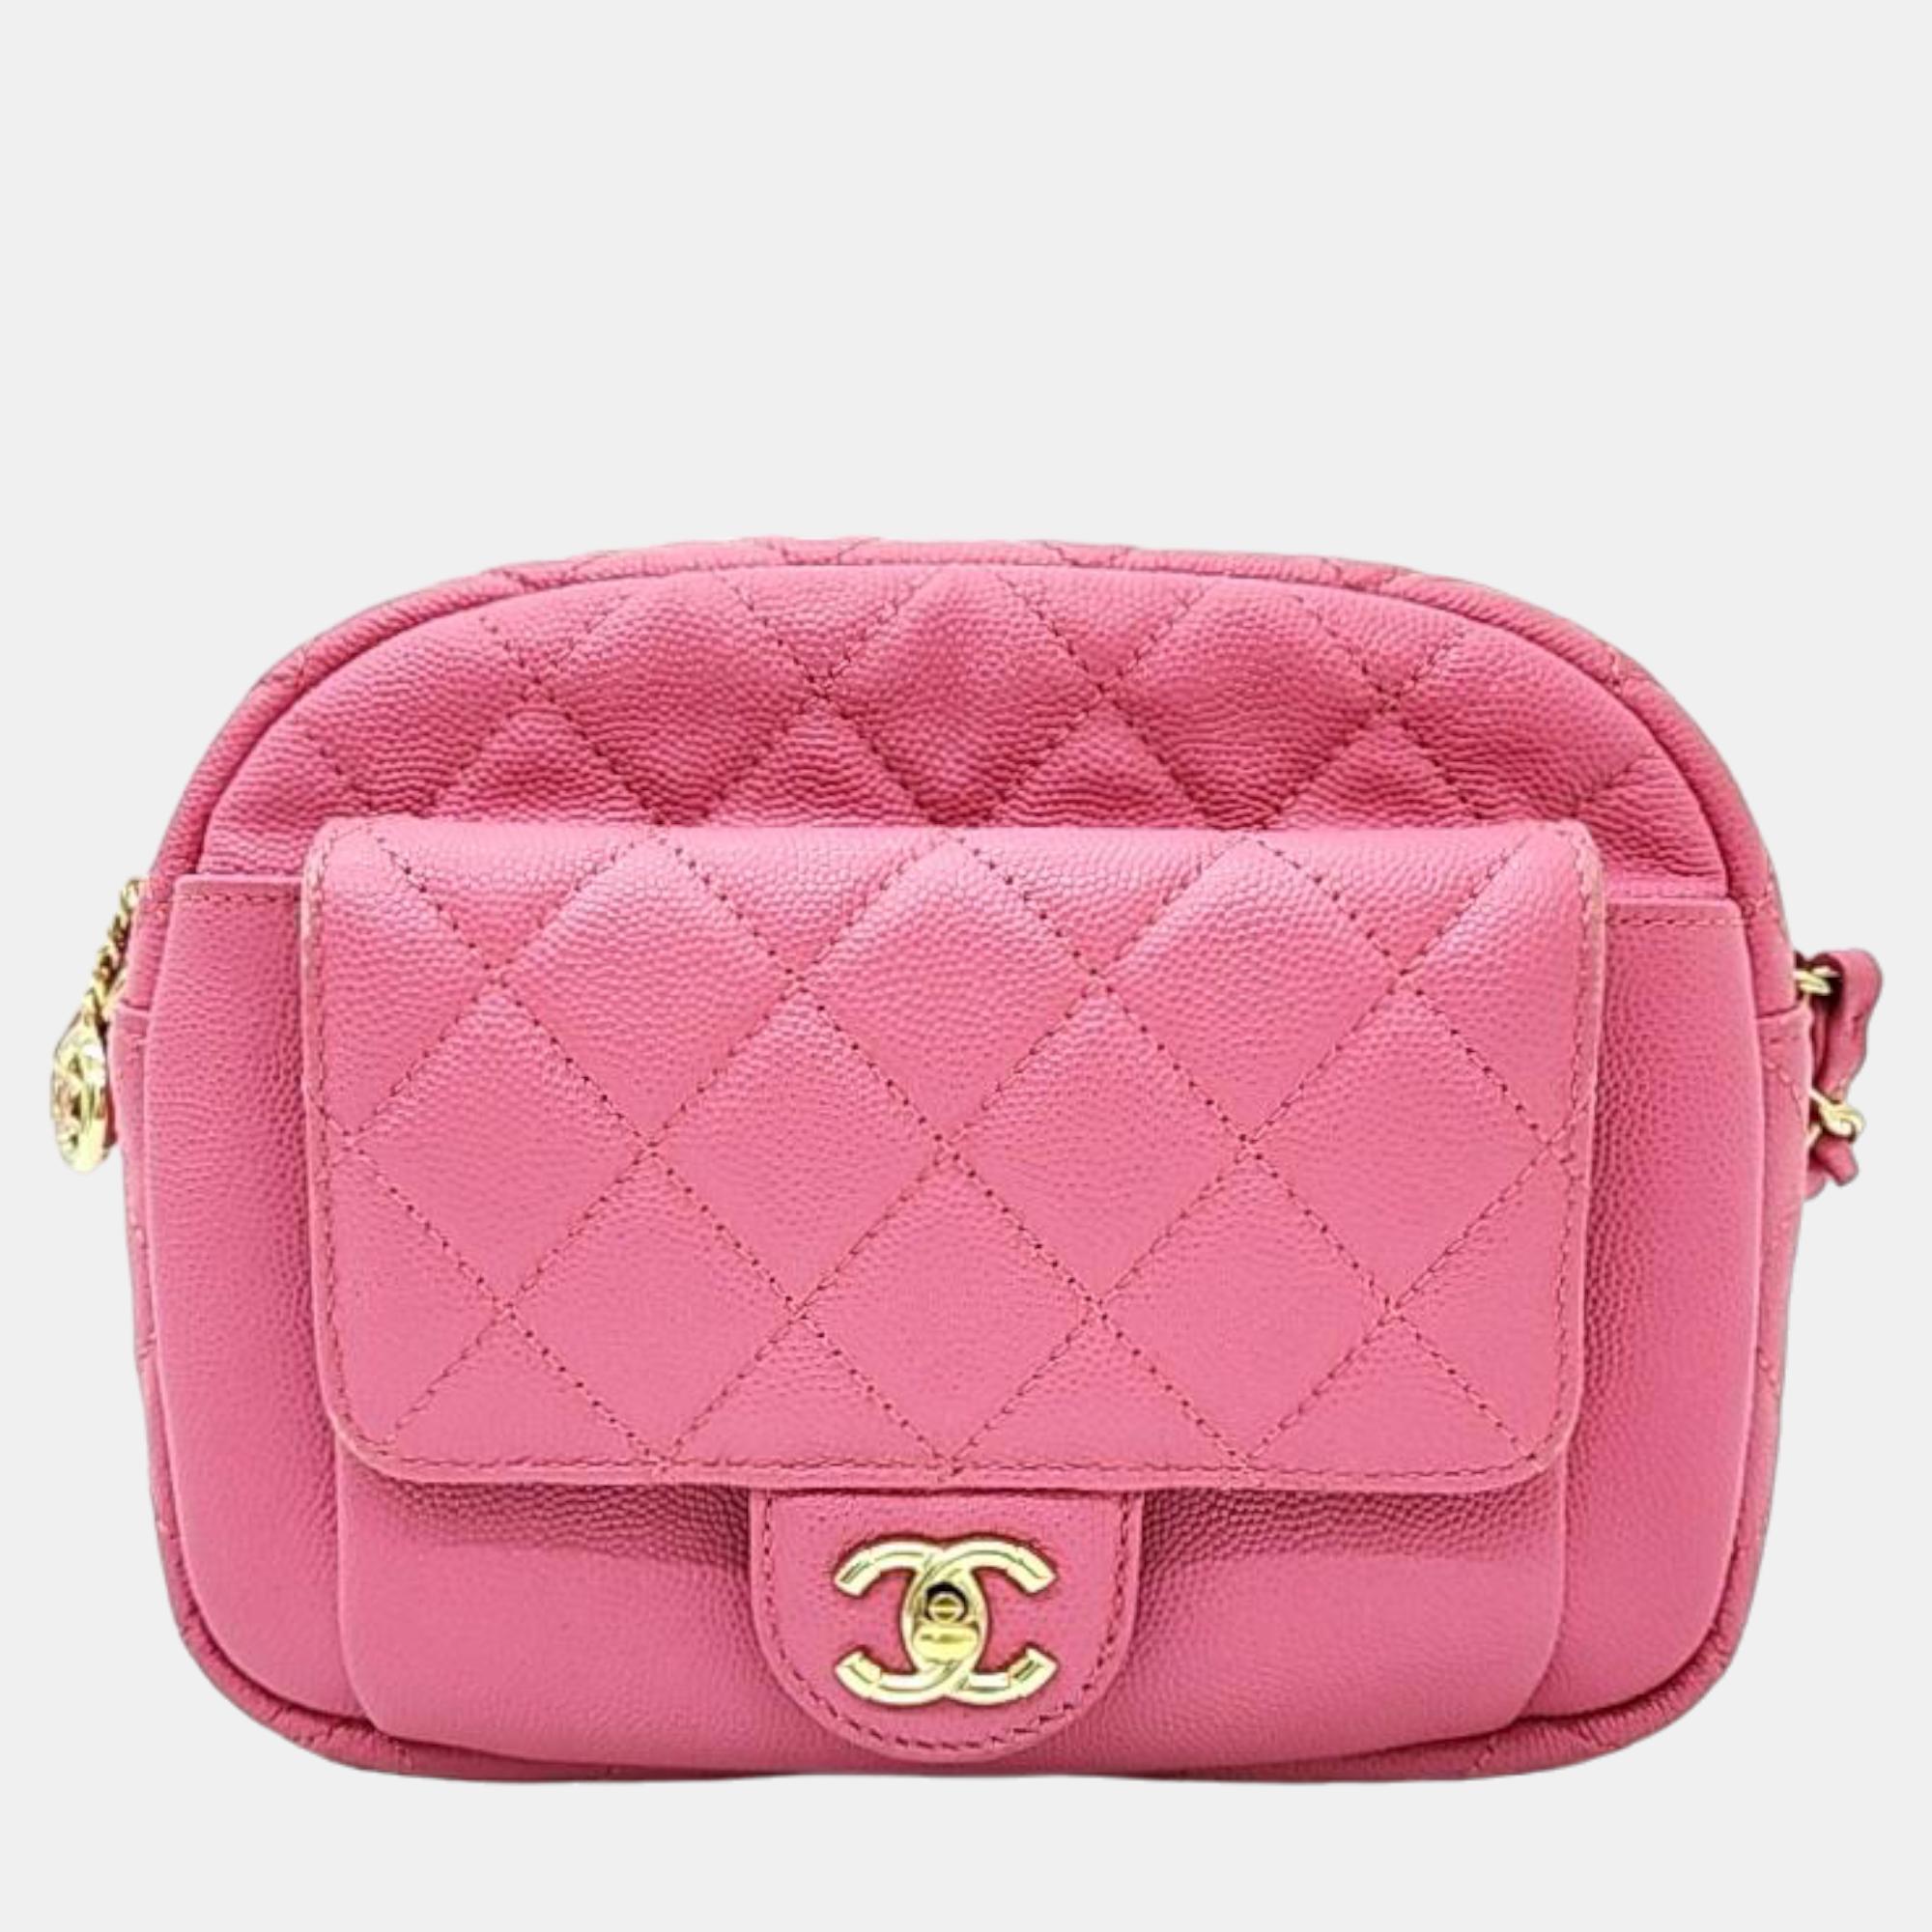 Chanel pink leather cc day camera case chain shoulder bag